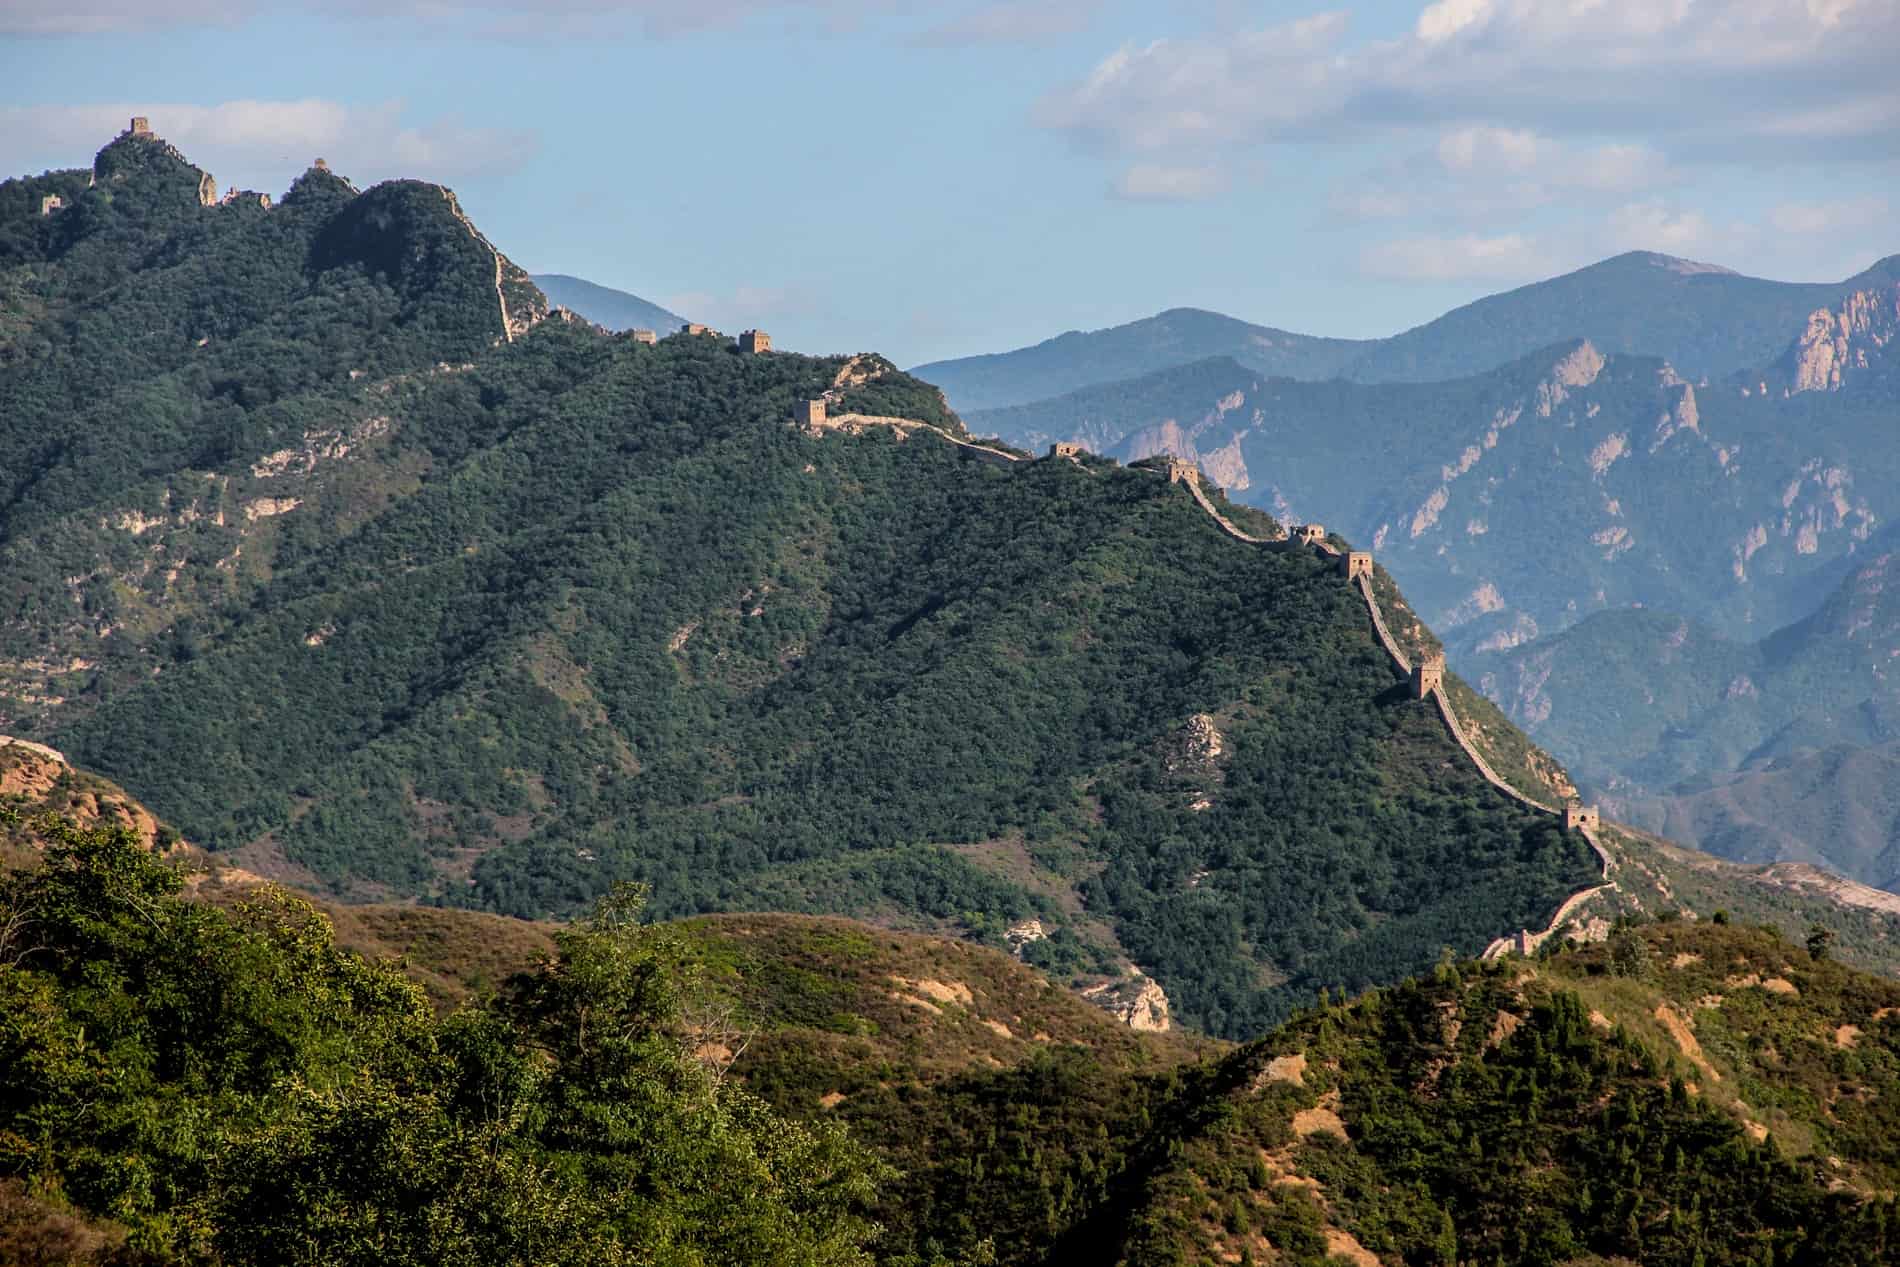 The Great Wall of China stretching along the jagged ridge of a forested mountain. 